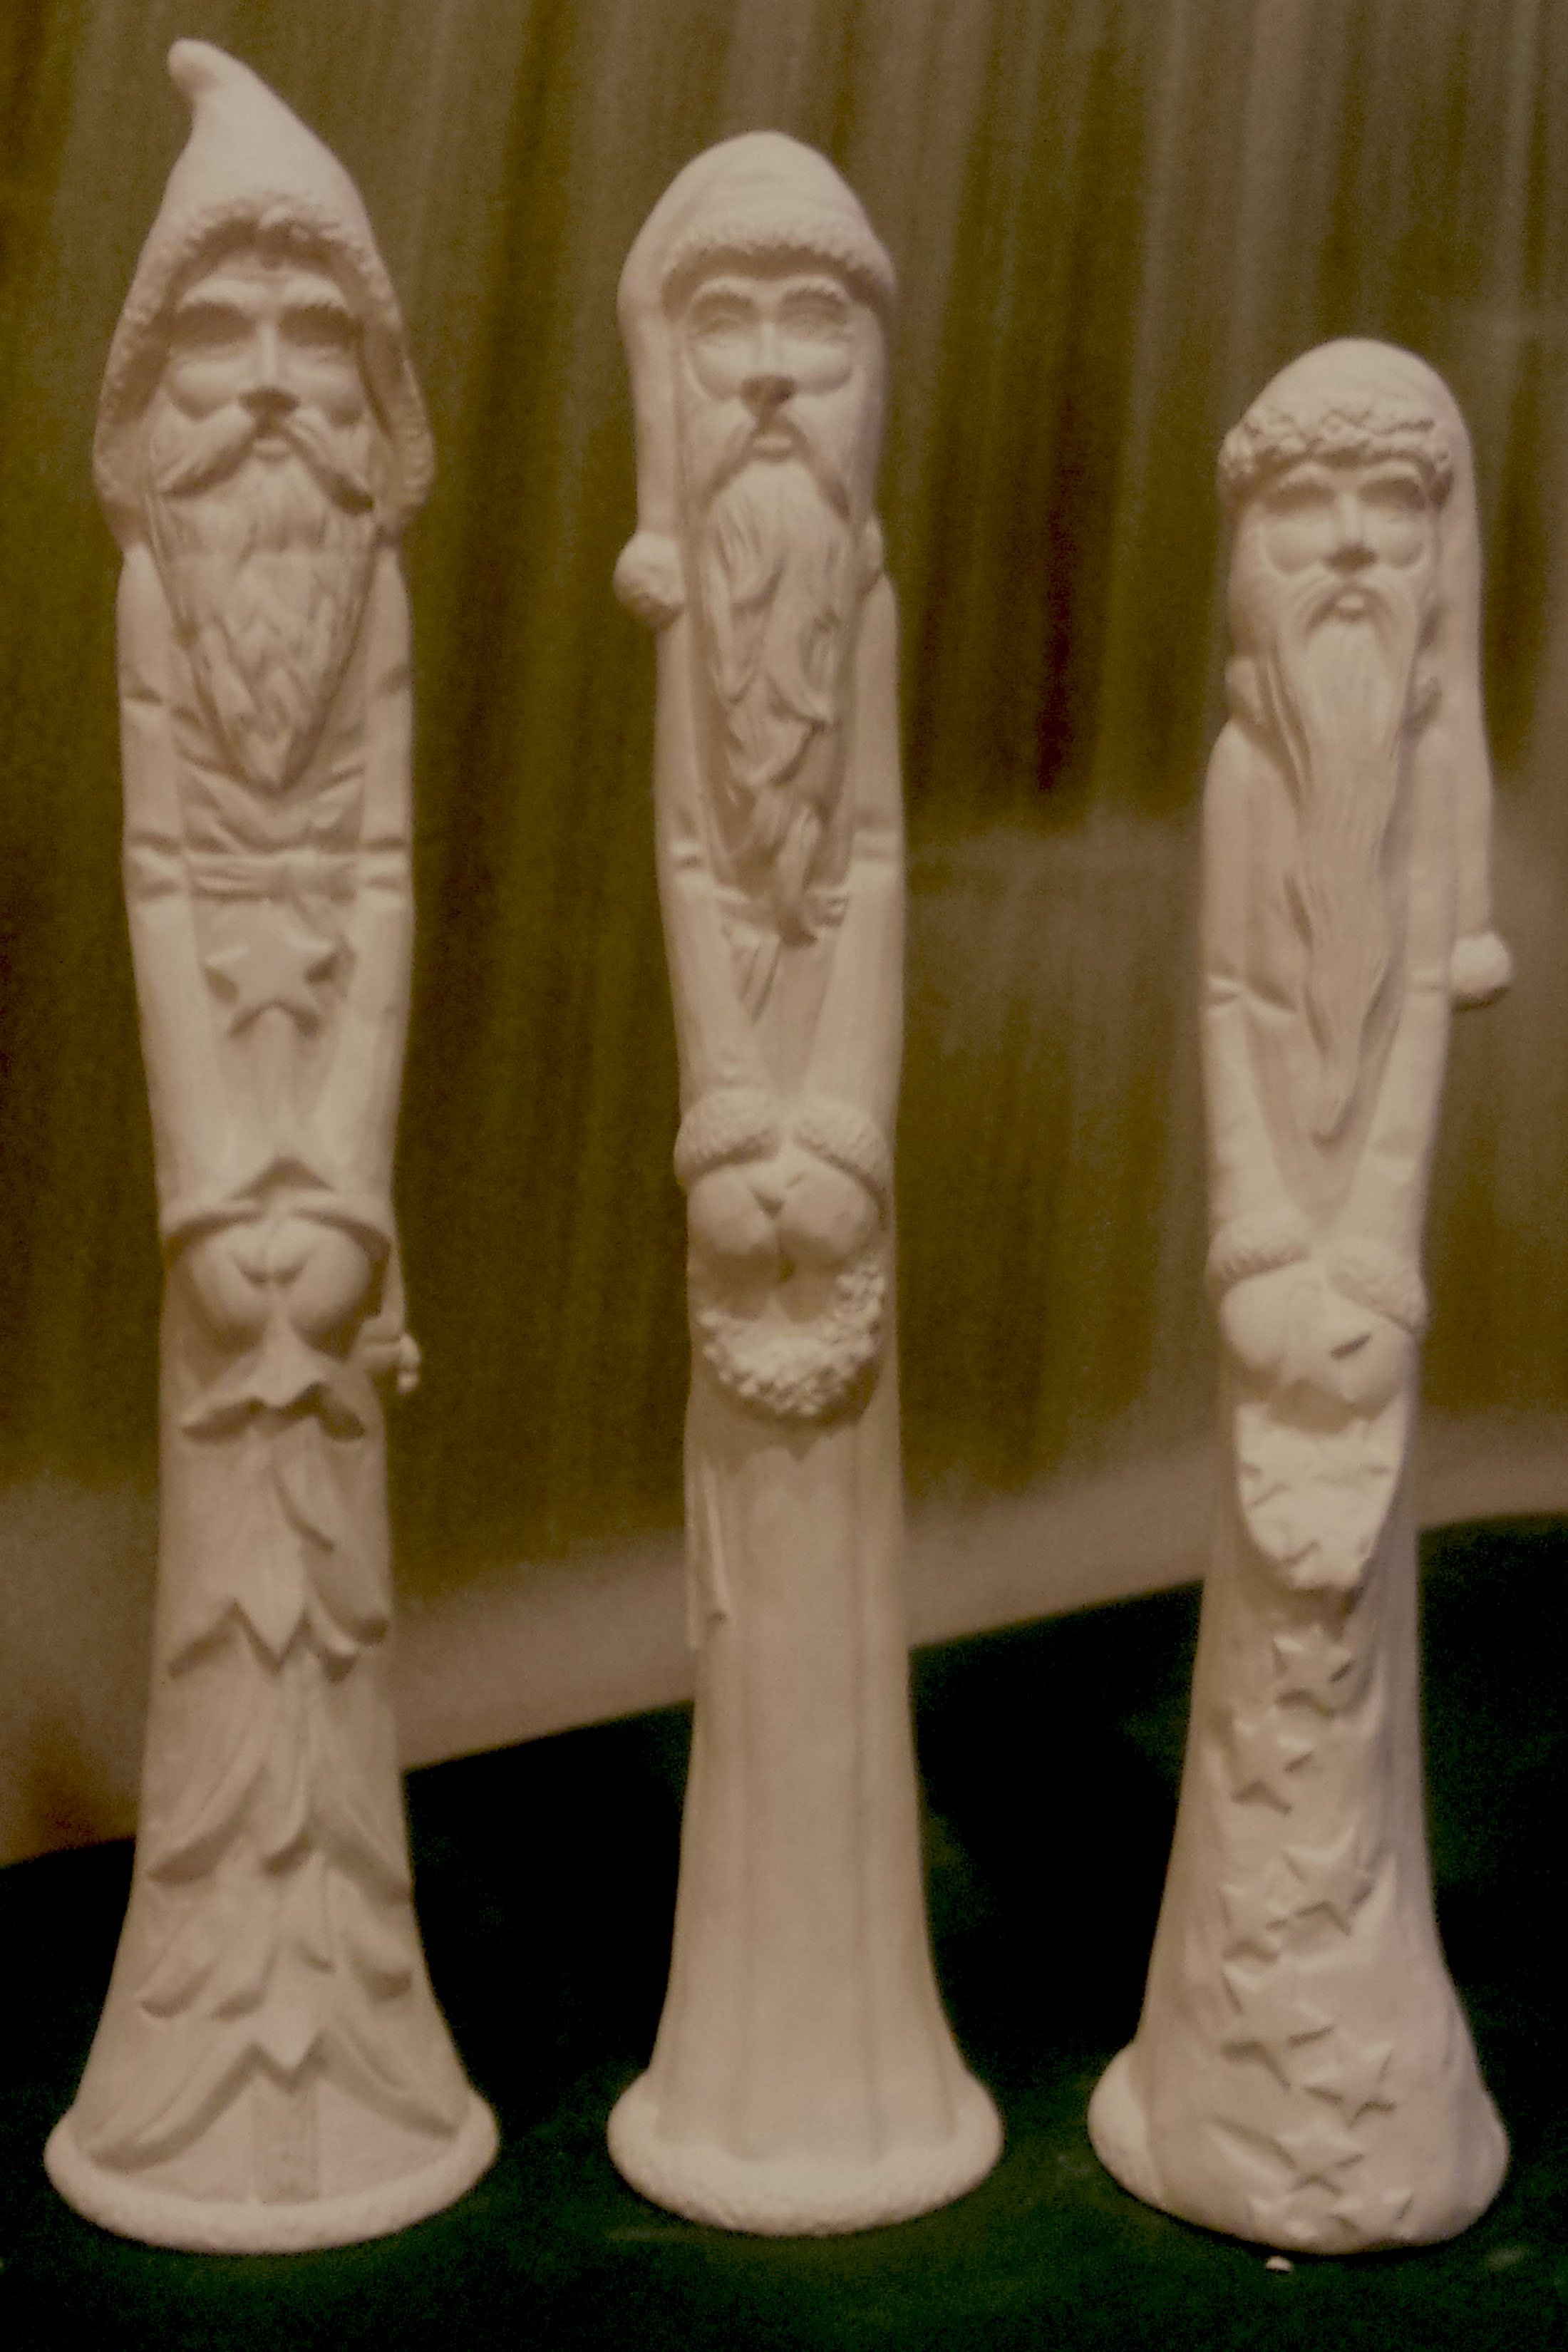 You Paint Ceramic Bisque Mr & Mrs Claus Shelf Sitter Ready to Paint Unpainted 